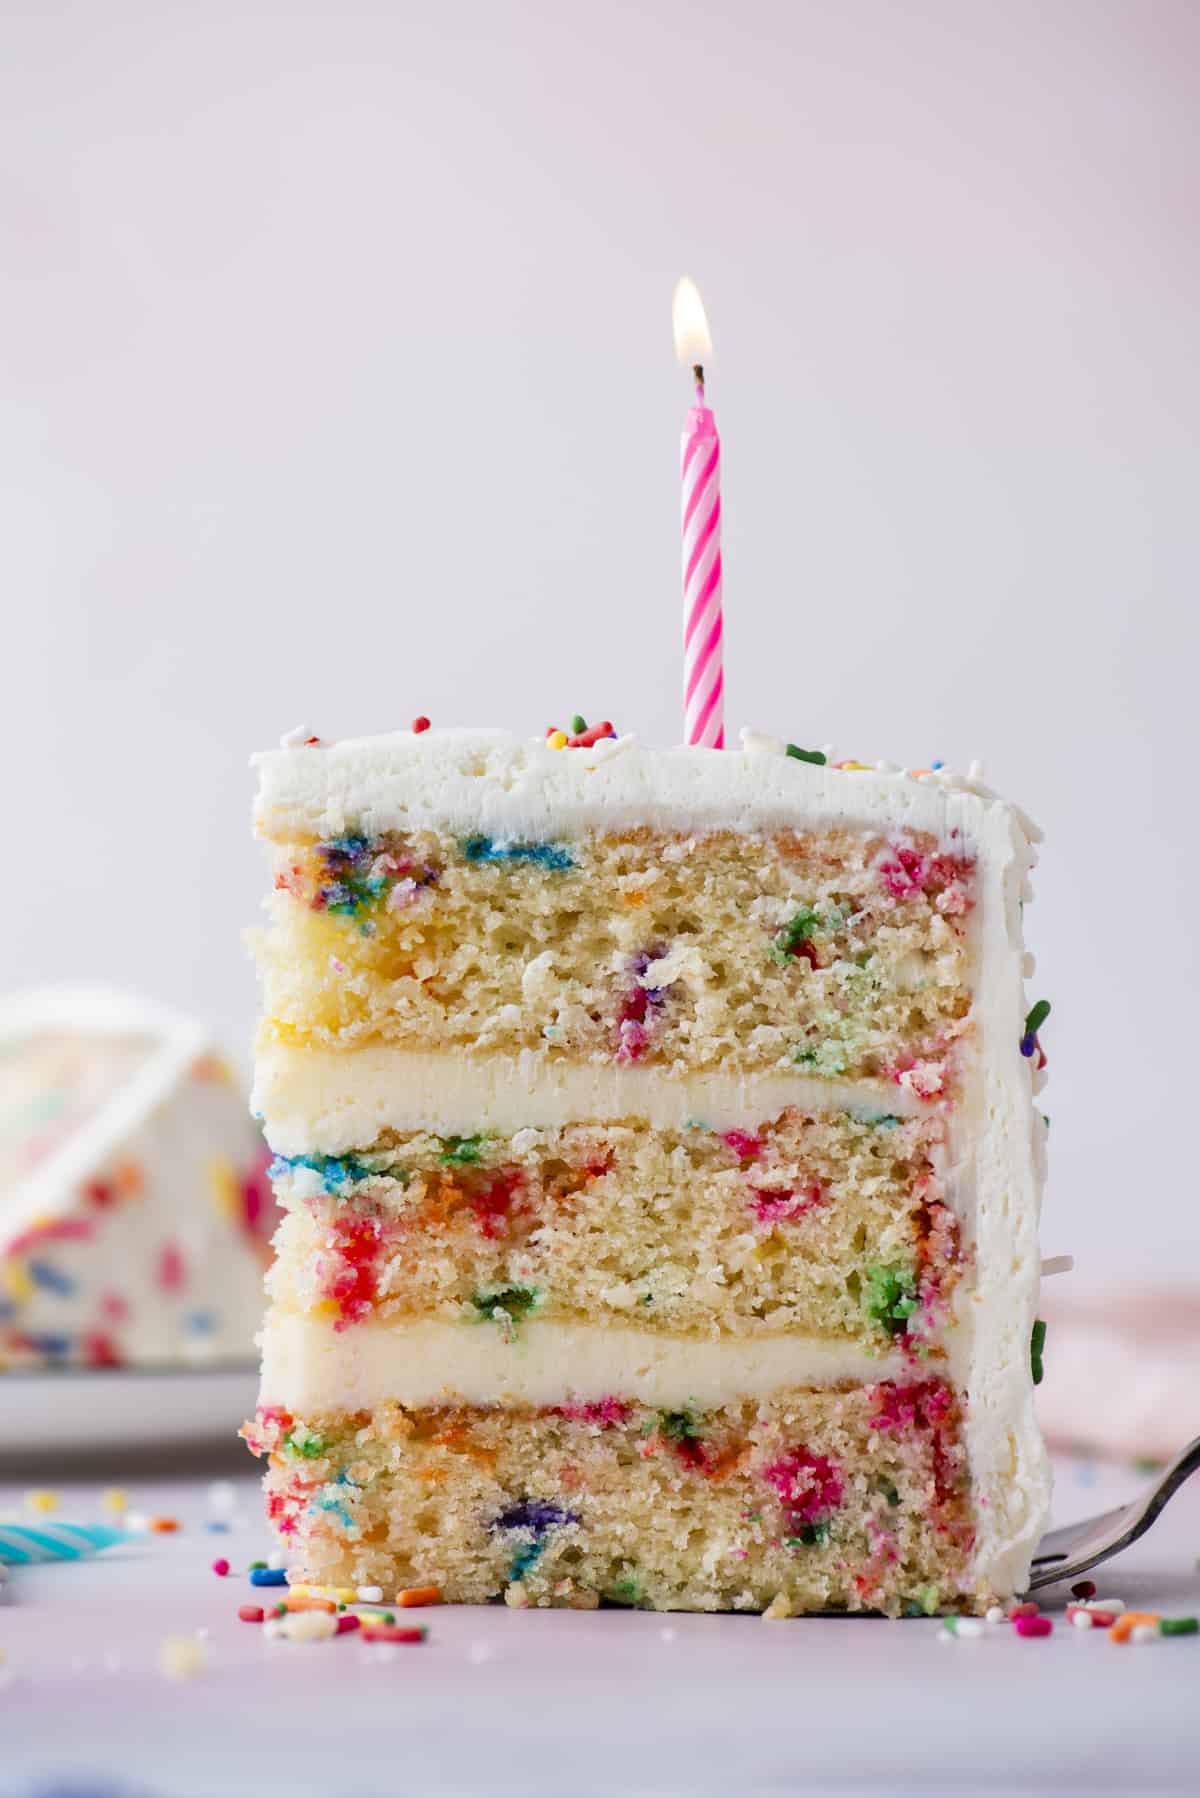 a slice of funfetti cake from the side showing its three layers of cake with white icing in between and a lit pink and white striped candle in the top of the slice, with sprinkles scattered around